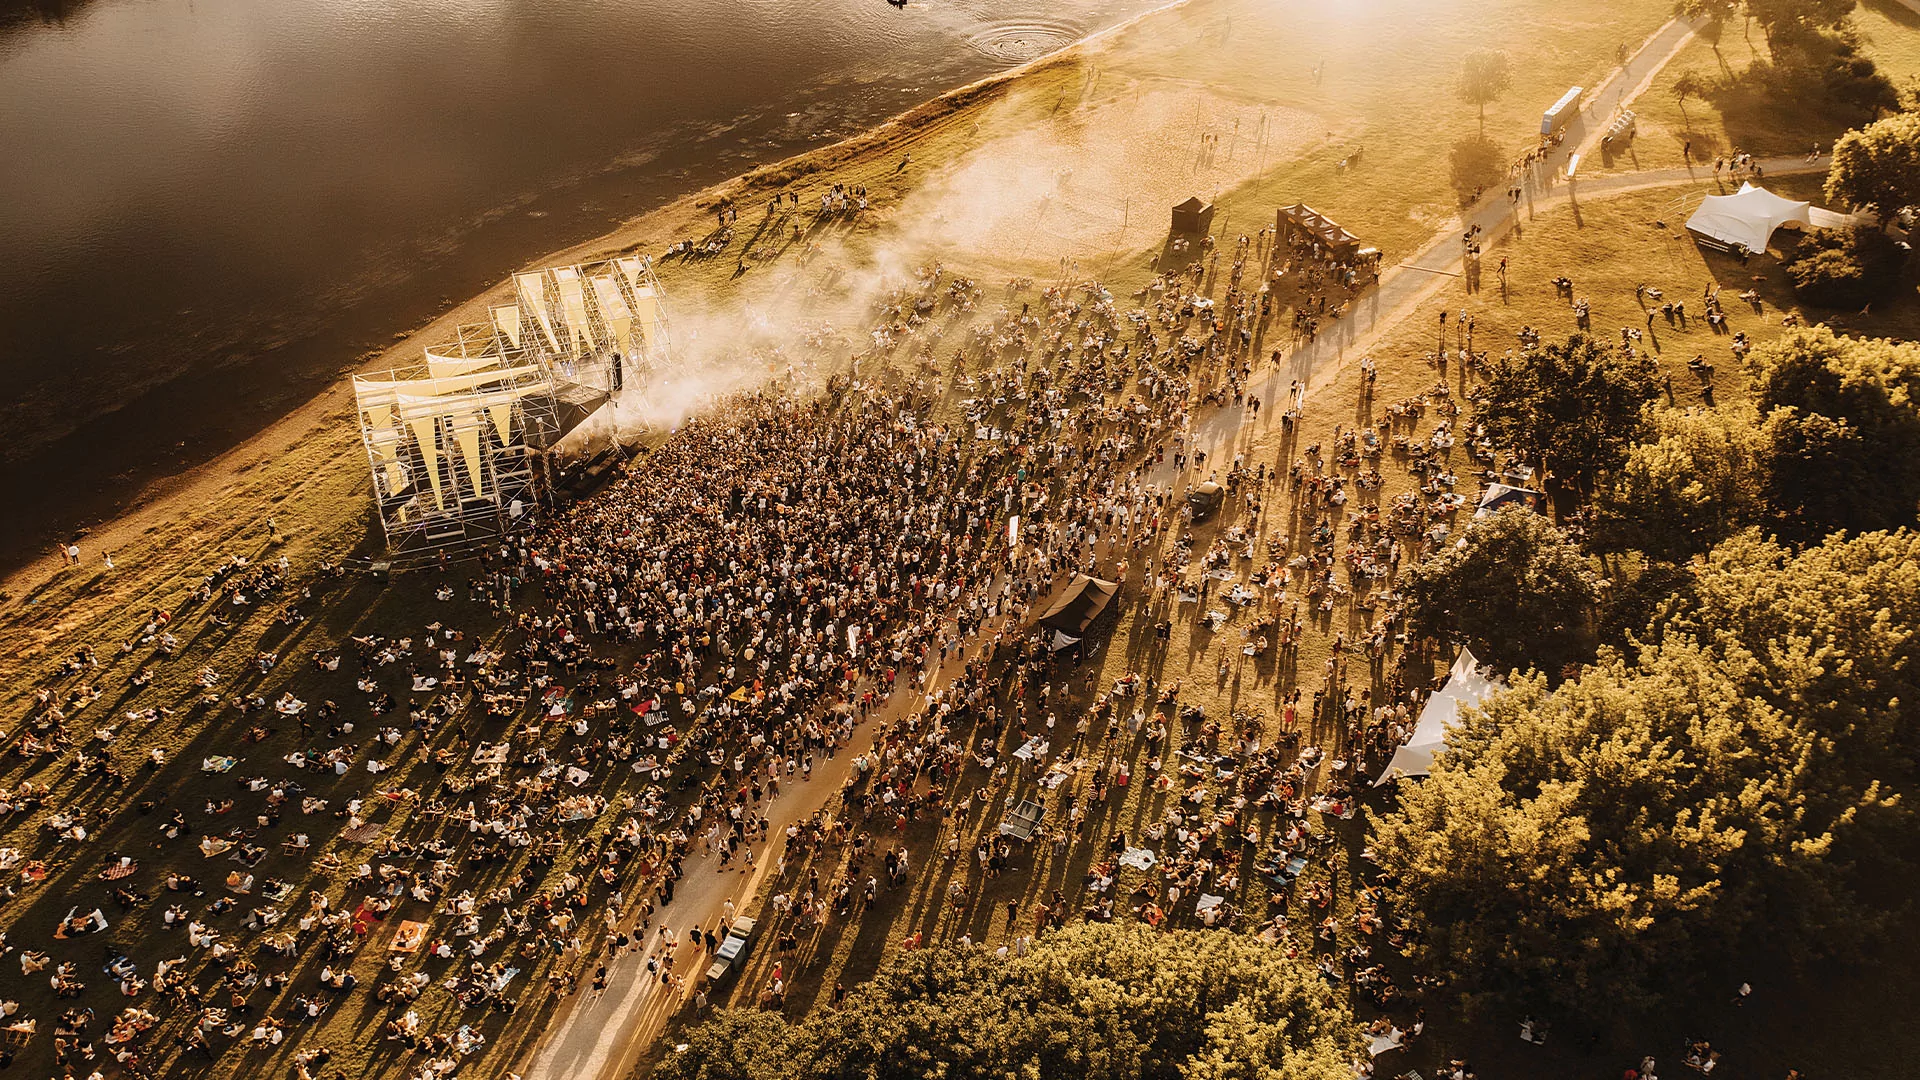 Ariel shot of the crowd outside at AUDRA festival at dusk